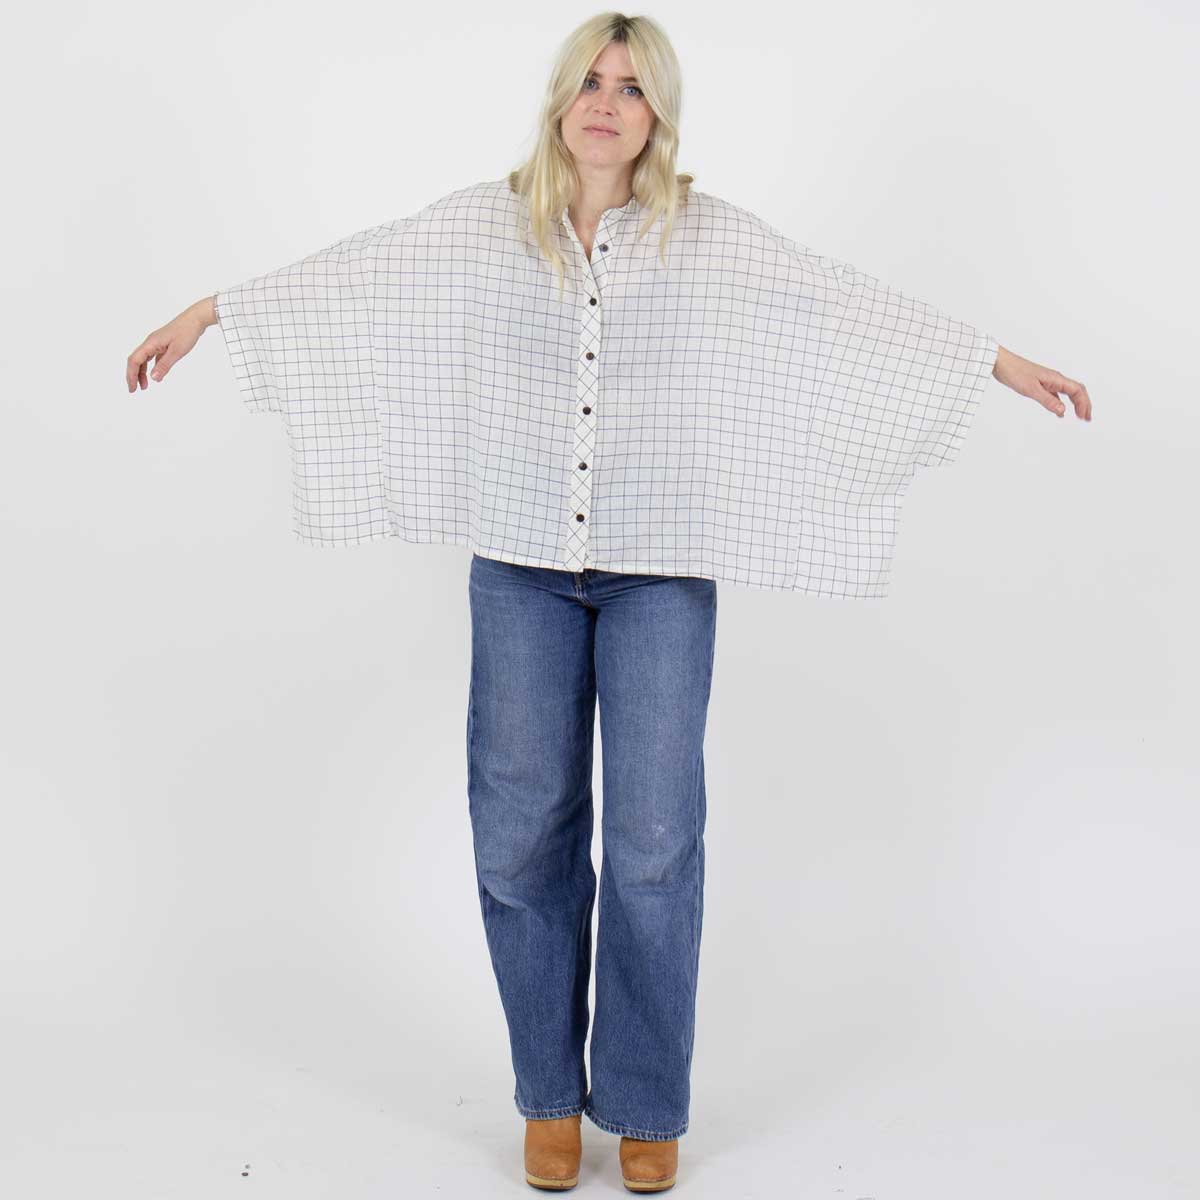 WHITE/BLUE CHECK Blouse, one size